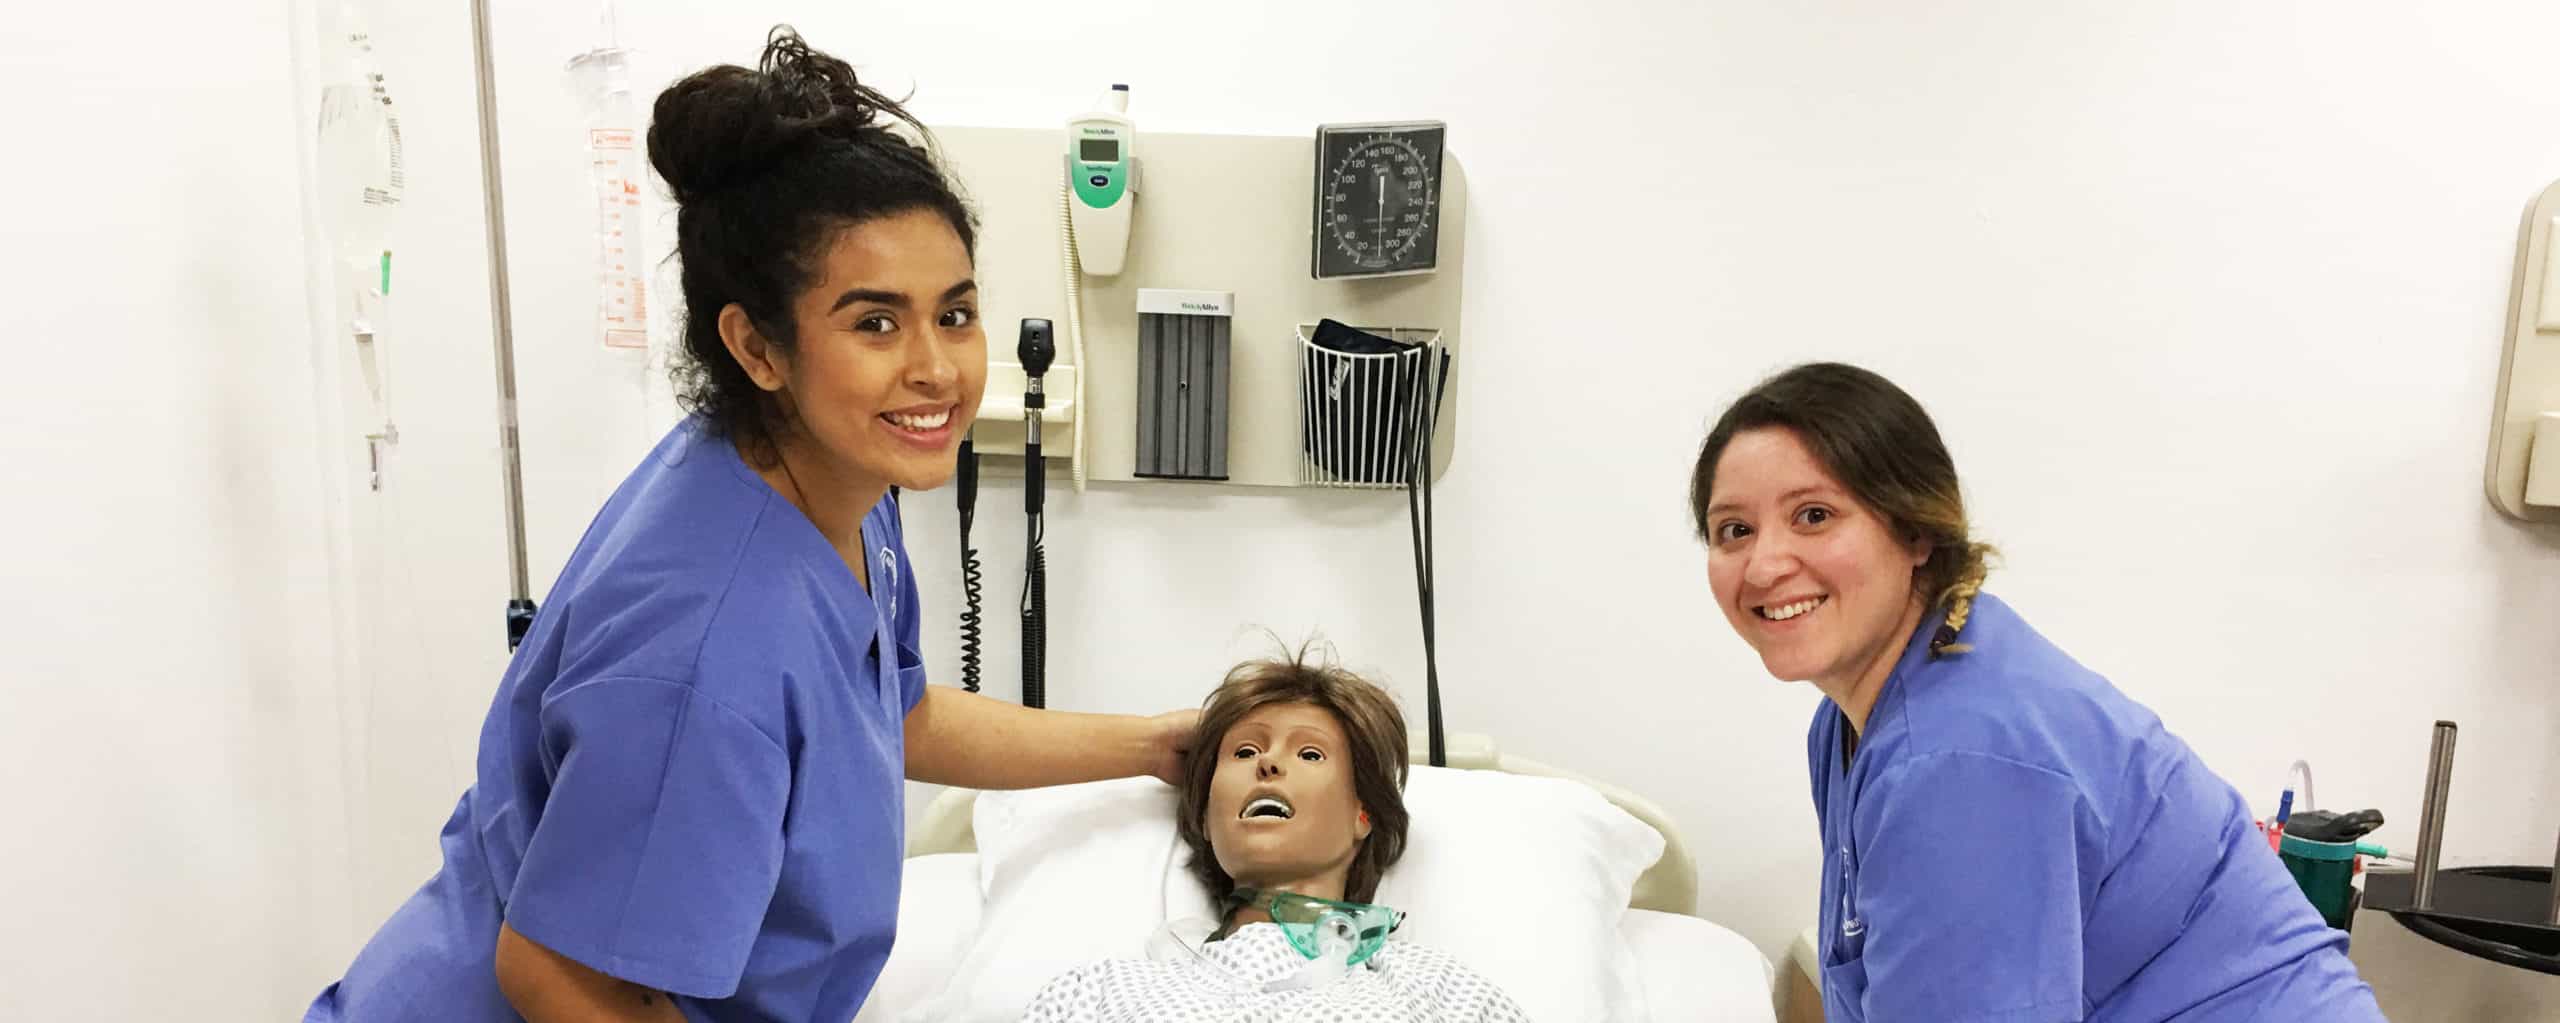 Two smiling nurses posing in lab with a patient doll